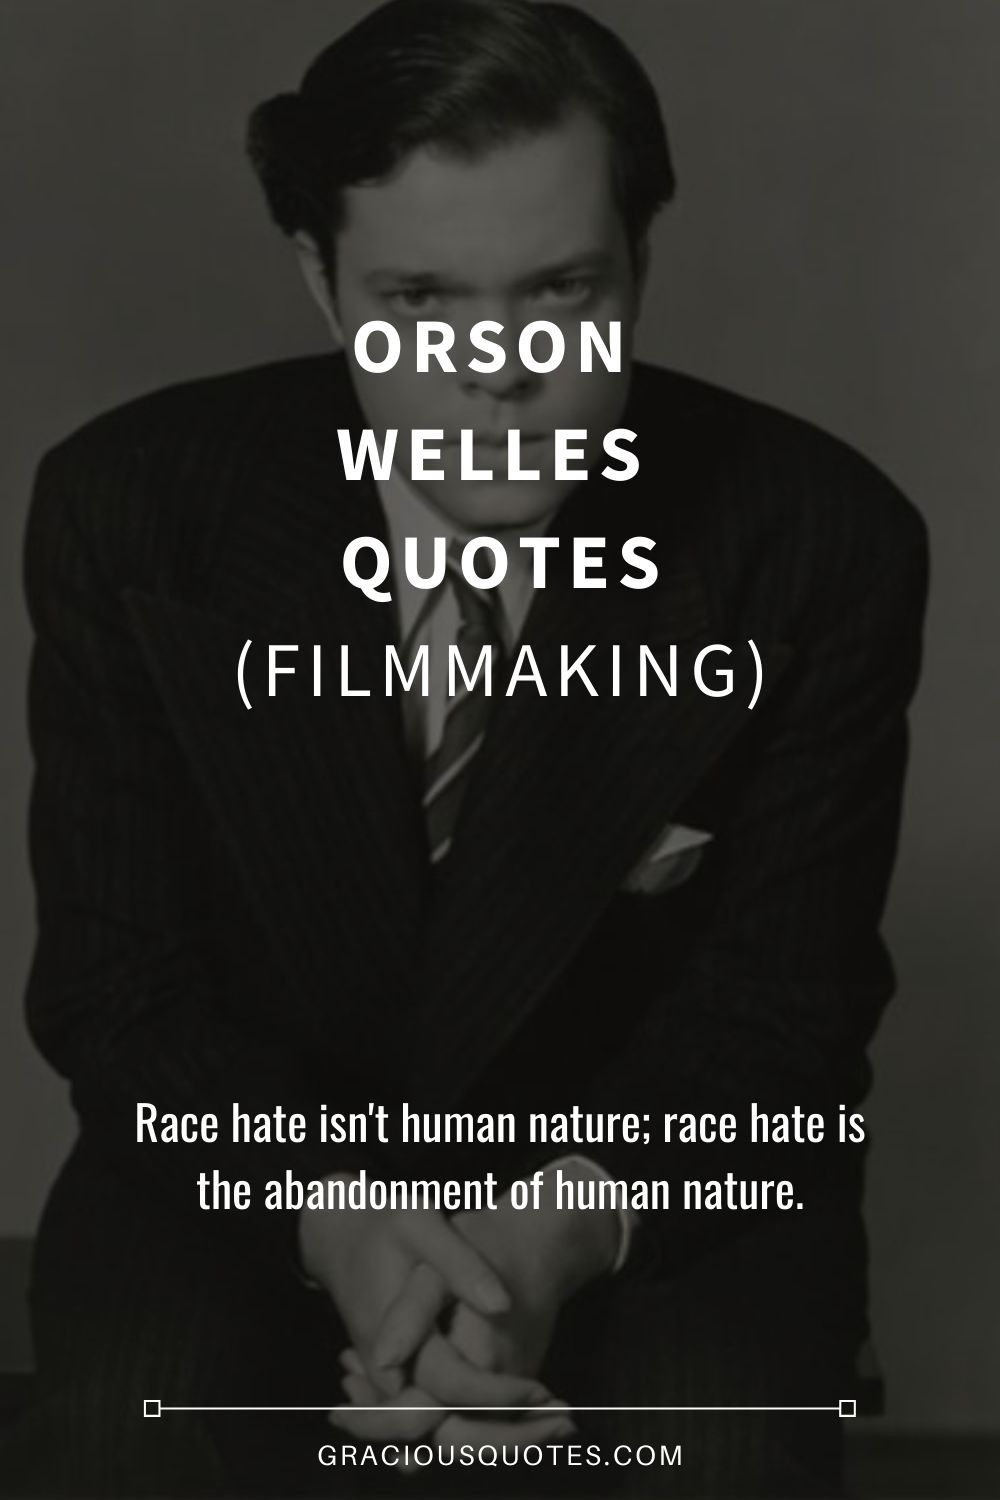 Orson Welles Quotes (FILMMAKING) - Gracious Quotes